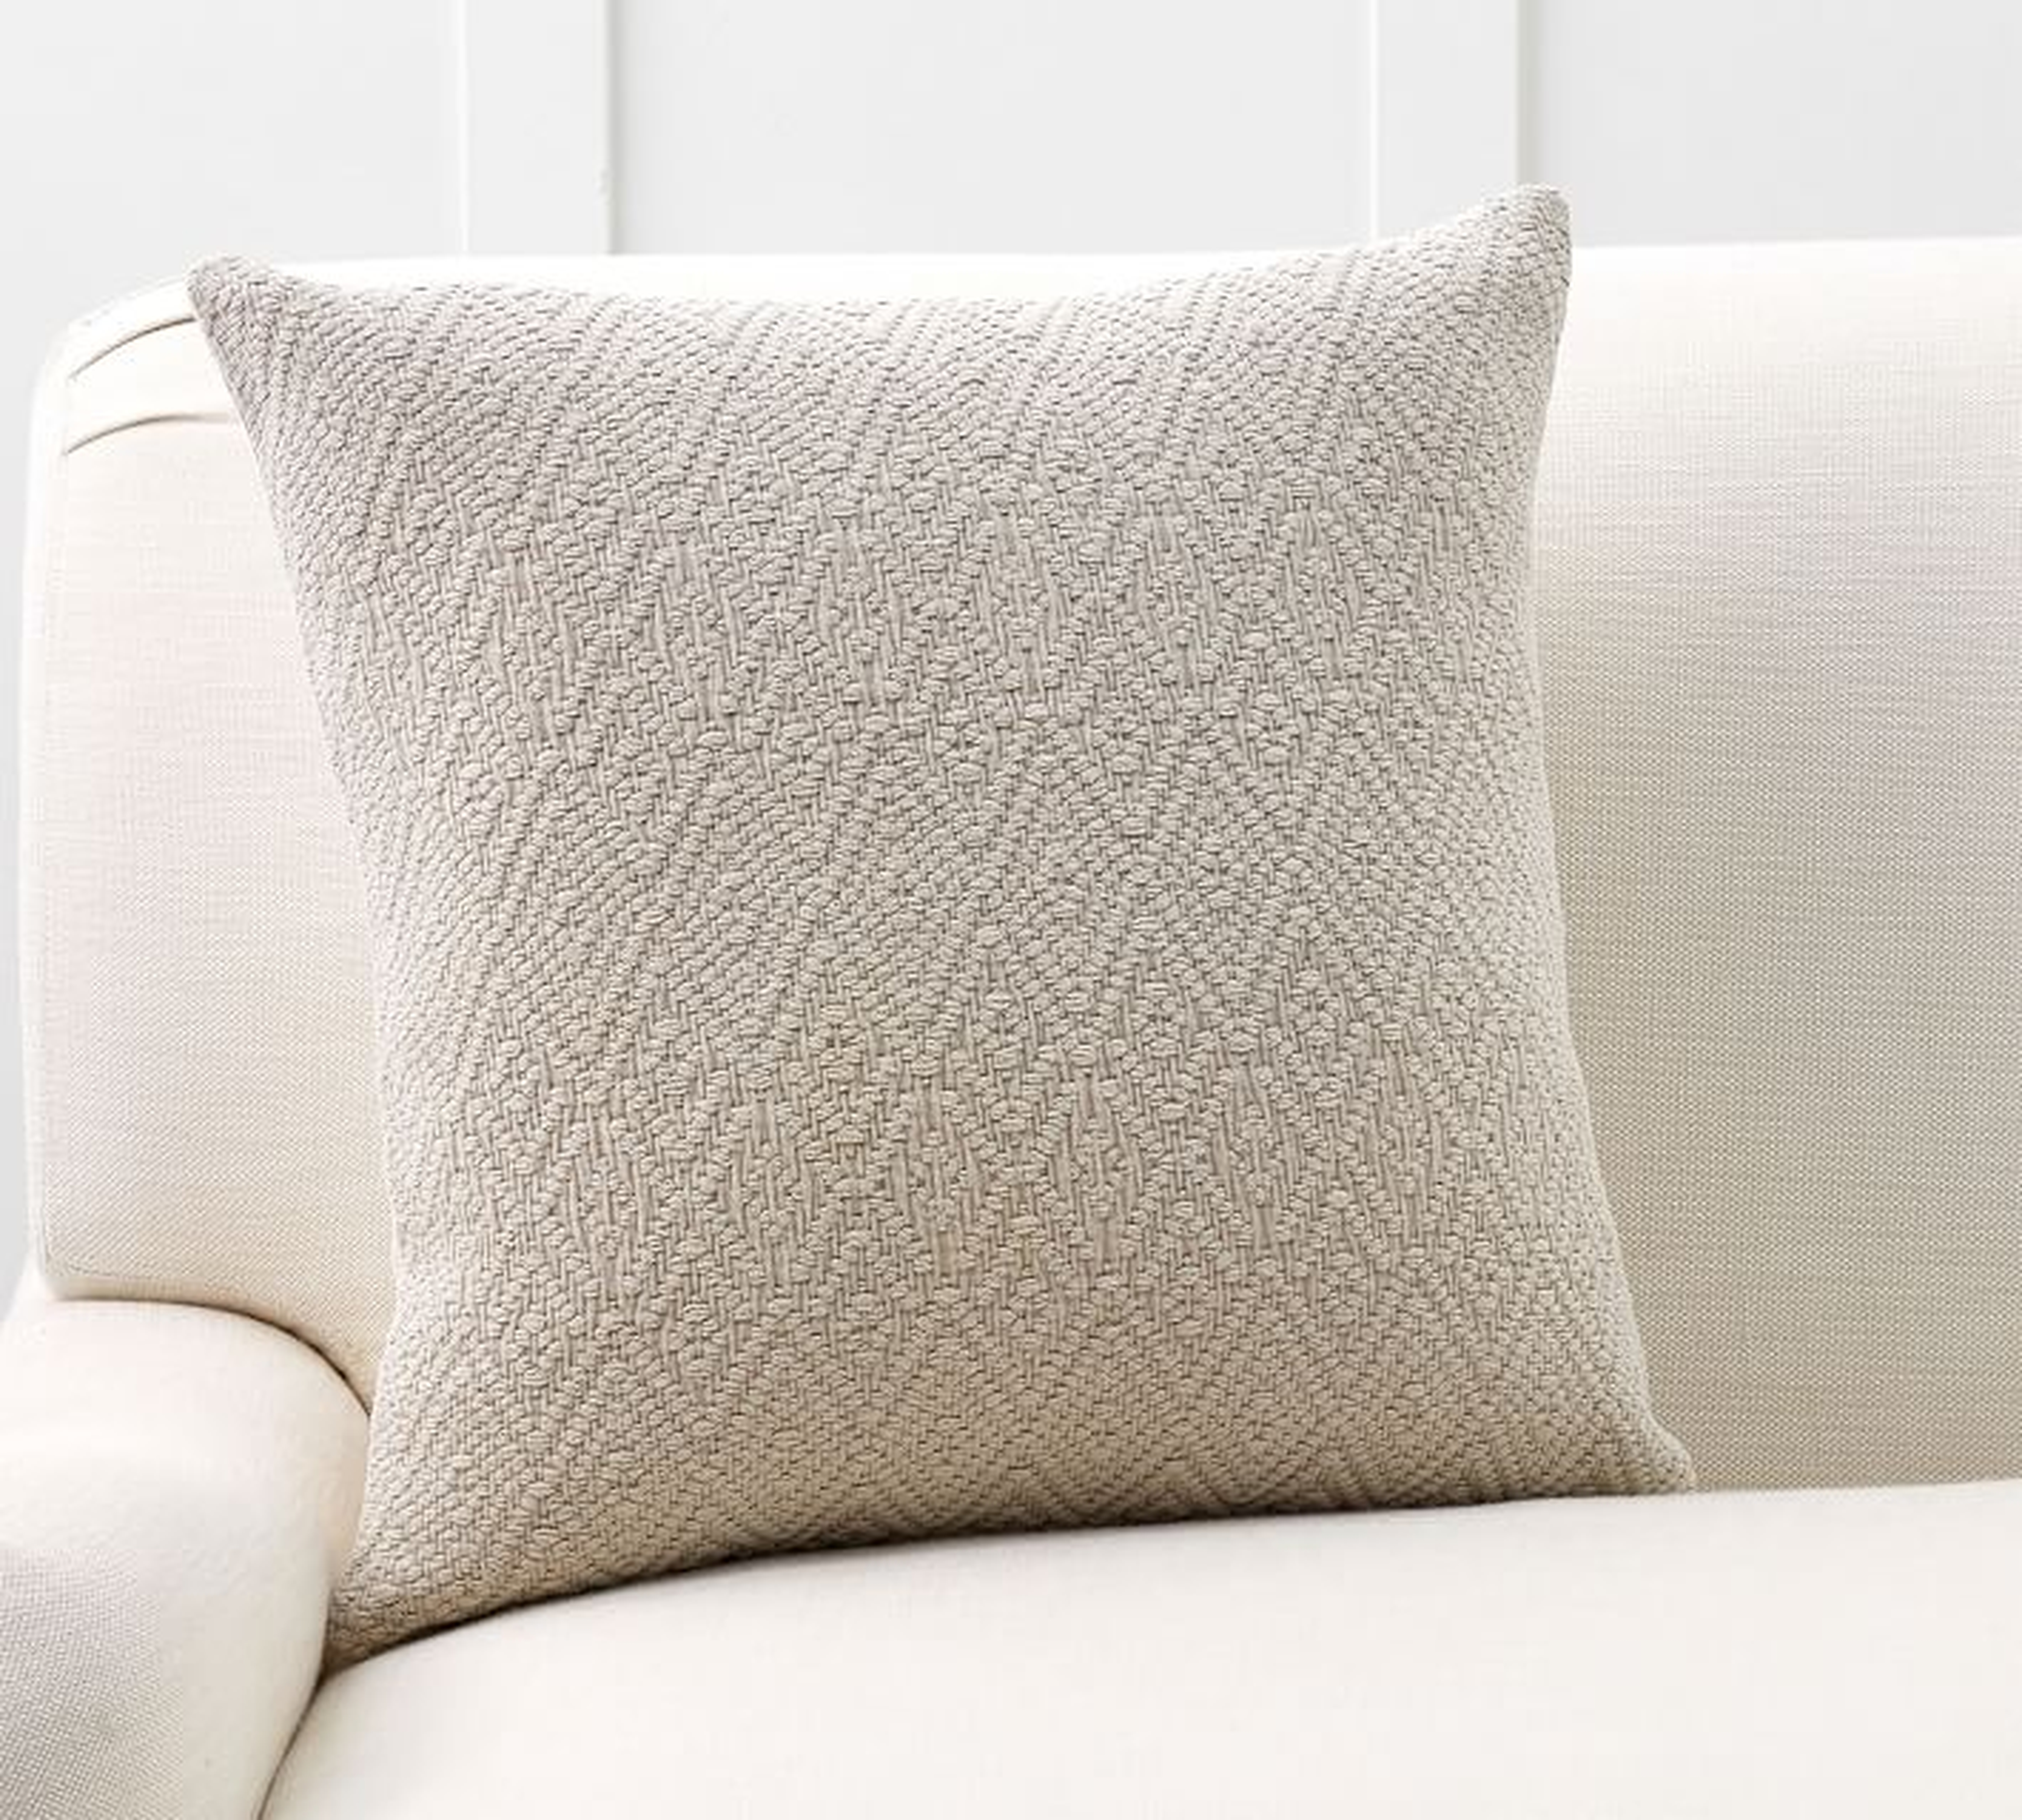 WASHED DIAMOND PILLOW COVER - Pottery Barn